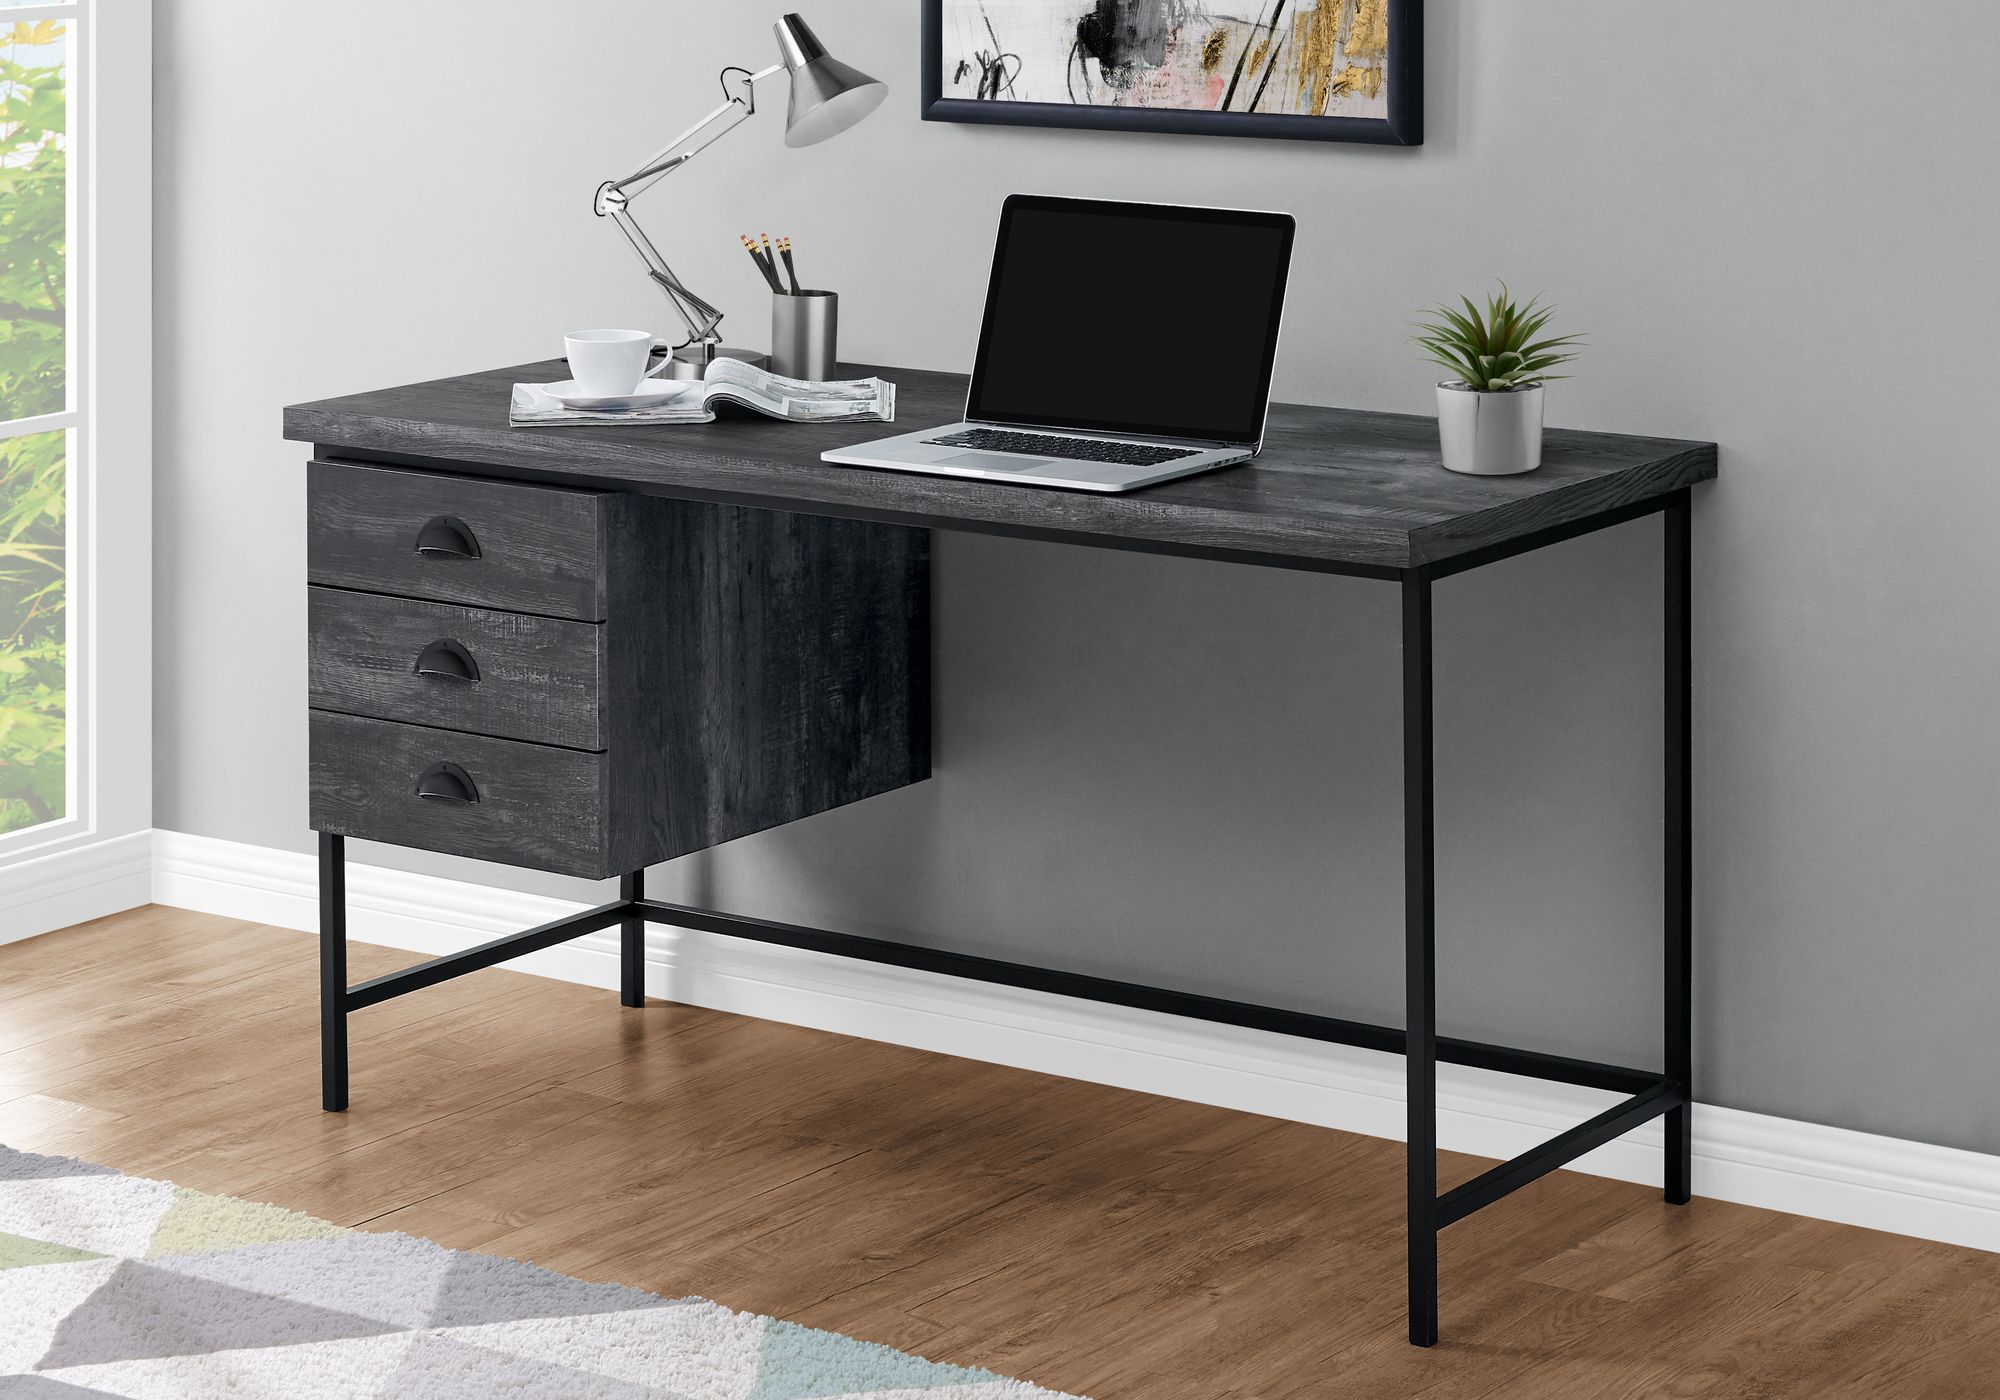 I 7488 – Computer Desk – 55"l / Black Reclaimed Wood / Black Metal Within Most Recently Released Natural Wood And White Metal Office Desks (View 7 of 15)